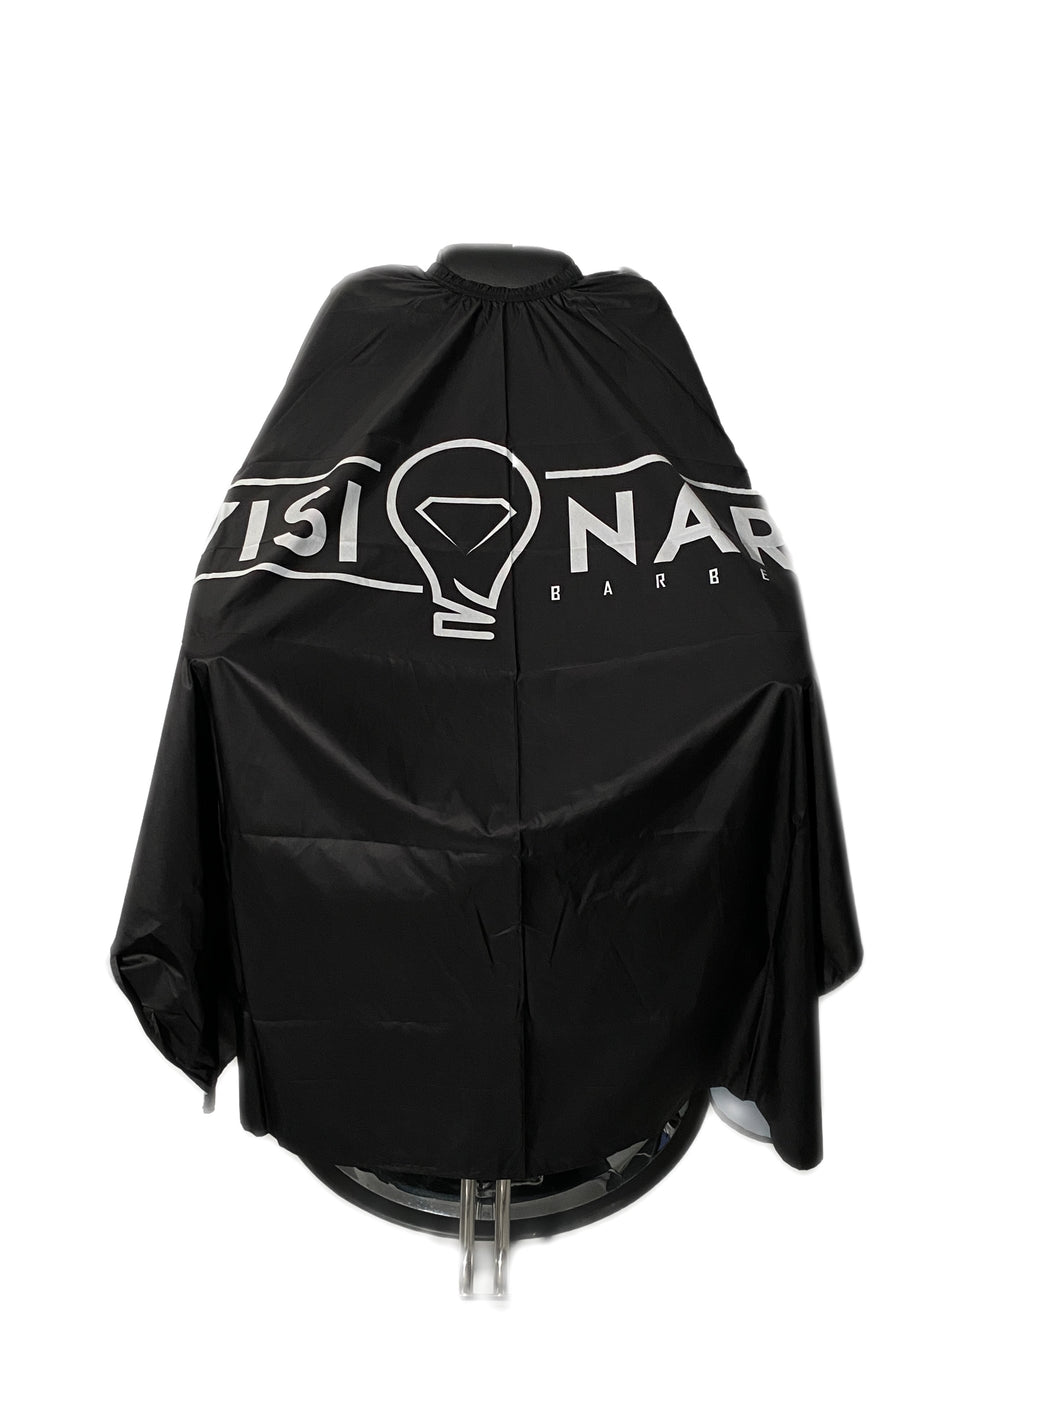 Black and White Visionary Cape